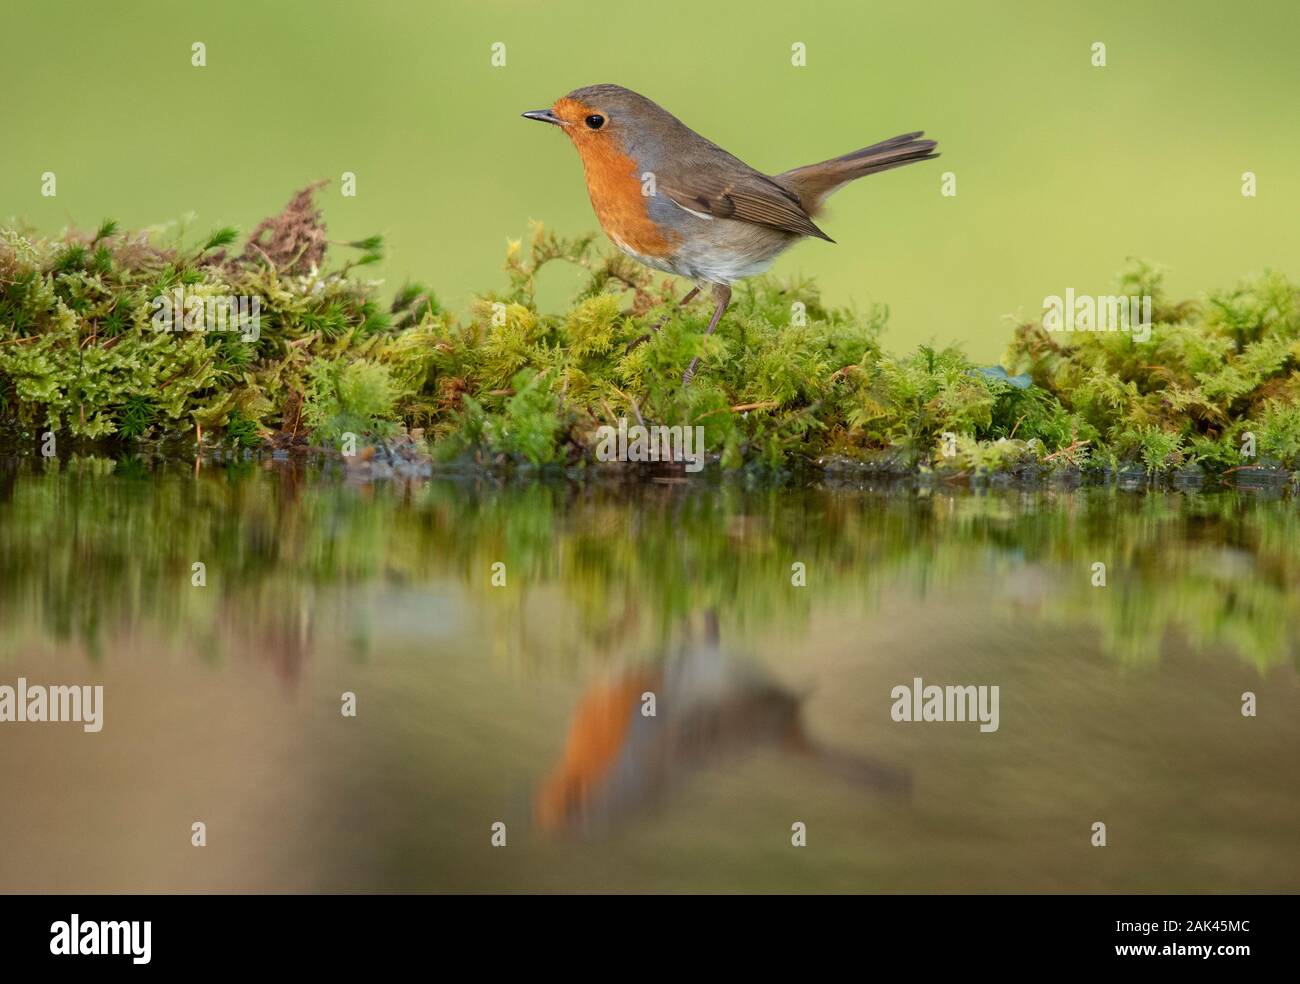 Robin (Erithacus rubecula). Bird standing at the edge of a woodland pond with reflection in the water. Stock Photo